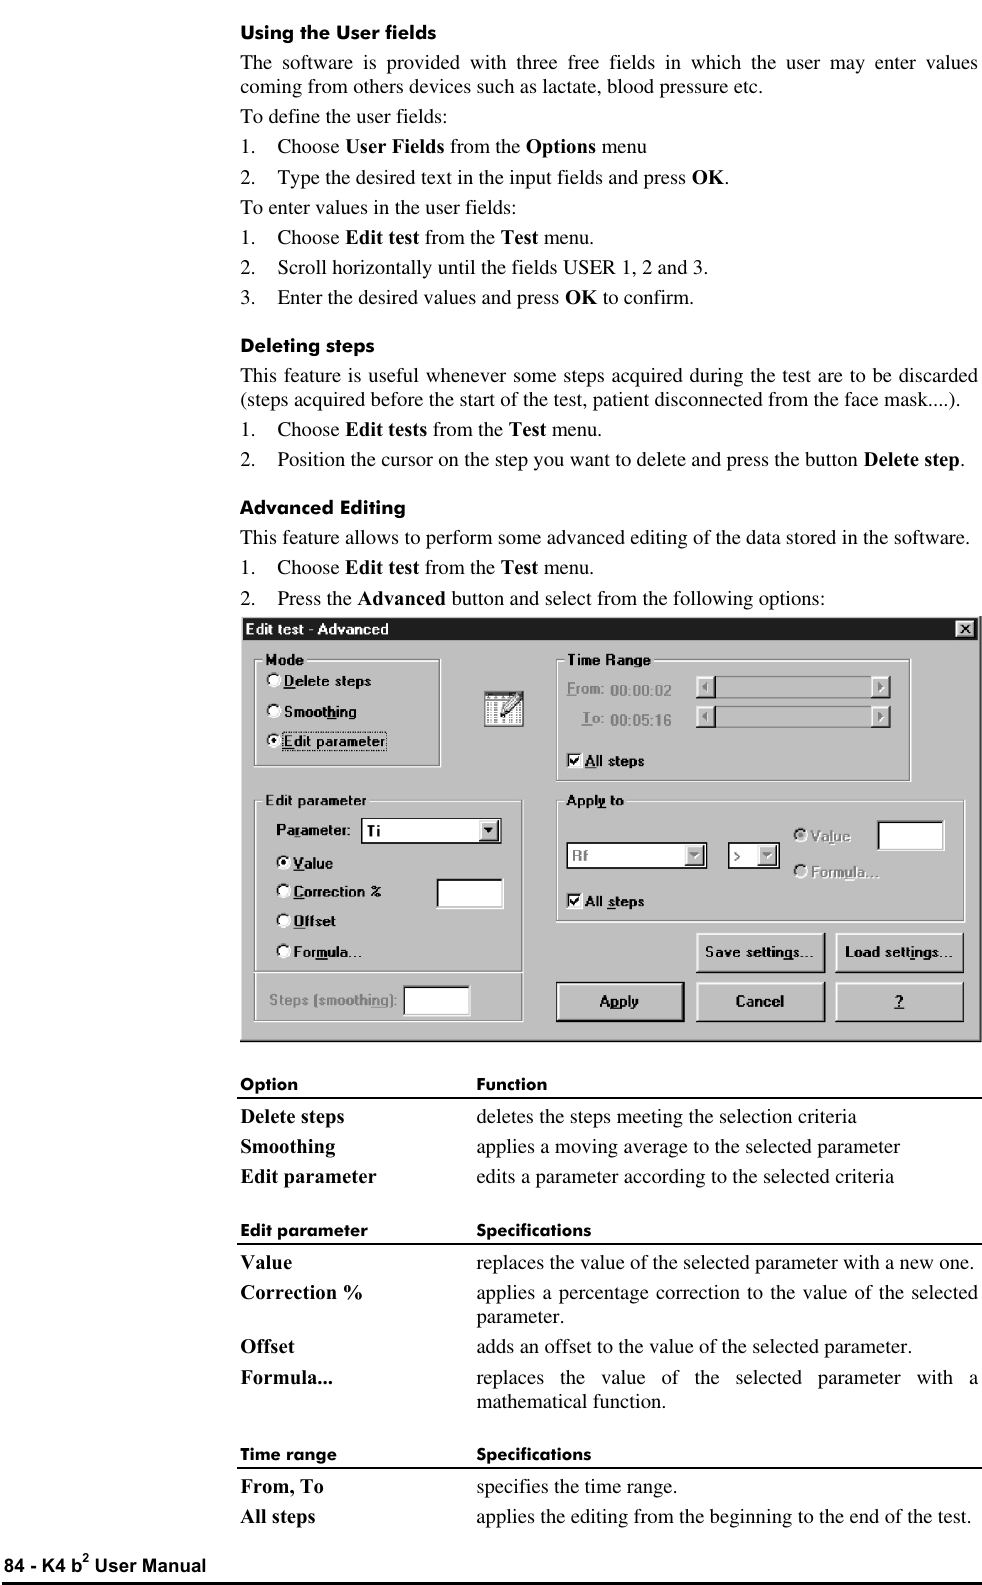  84 - K4 b2 User Manual Using the User fields The software is provided with three free fields in which the user may enter values coming from others devices such as lactate, blood pressure etc. To define the user fields: 1.  Choose User Fields from the Options menu 2. Type the desired text in the input fields and press OK. To enter values in the user fields: 1. Choose Edit test from the Test menu. 2. Scroll horizontally until the fields USER 1, 2 and 3. 3. Enter the desired values and press OK to confirm. Deleting steps This feature is useful whenever some steps acquired during the test are to be discarded (steps acquired before the start of the test, patient disconnected from the face mask....). 1.  Choose Edit tests from the Test menu. 2. Position the cursor on the step you want to delete and press the button Delete step. Advanced Editing This feature allows to perform some advanced editing of the data stored in the software. 1.  Choose Edit test from the Test menu. 2. Press the Advanced button and select from the following options:  Option Function Delete steps deletes the steps meeting the selection criteria Smoothing applies a moving average to the selected parameter Edit parameter edits a parameter according to the selected criteria Edit parameter Specifications Value replaces the value of the selected parameter with a new one. Correction % applies a percentage correction to the value of the selected parameter. Offset adds an offset to the value of the selected parameter. Formula... replaces the value of the selected parameter with a mathematical function. Time range Specifications From, To specifies the time range. All steps applies the editing from the beginning to the end of the test. 